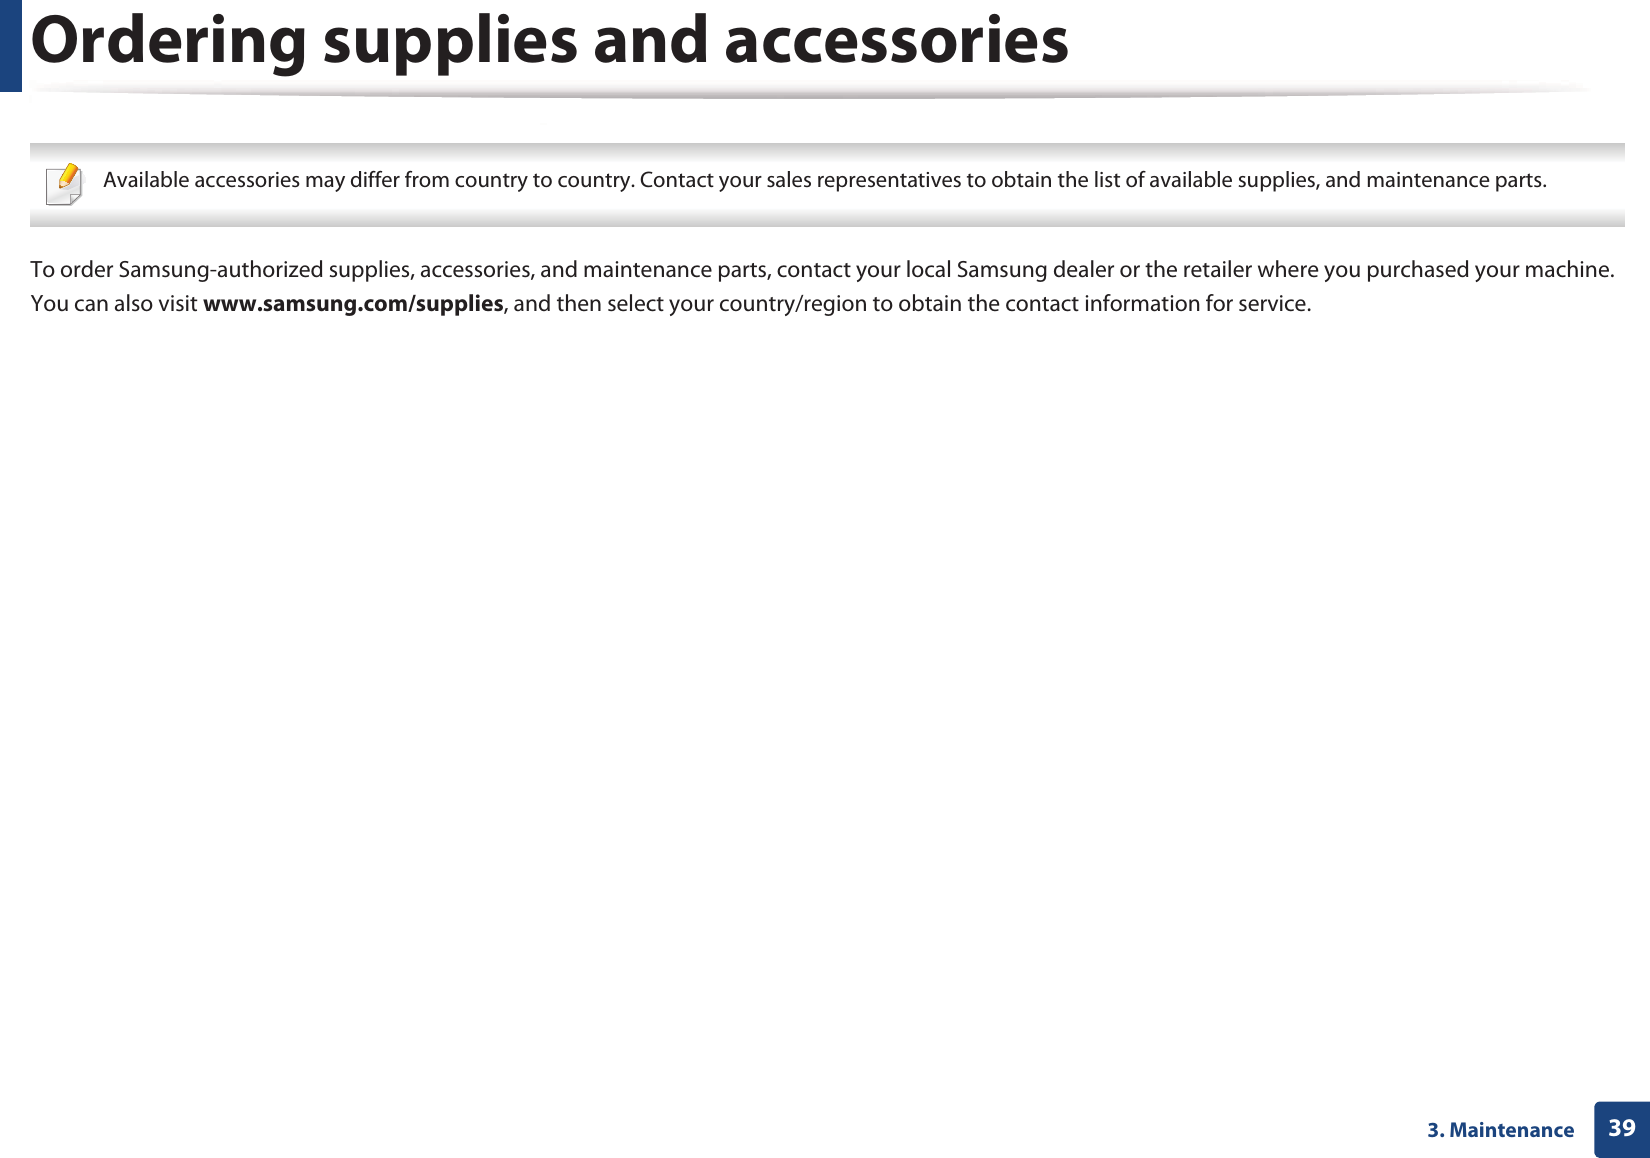 393. MaintenanceOrdering supplies and accessories Available accessories may differ from country to country. Contact your sales representatives to obtain the list of available supplies, and maintenance parts. To order Samsung-authorized supplies, accessories, and maintenance parts, contact your local Samsung dealer or the retailer where you purchased your machine. You can also visit www.samsung.com/supplies, and then select your country/region to obtain the contact information for service.